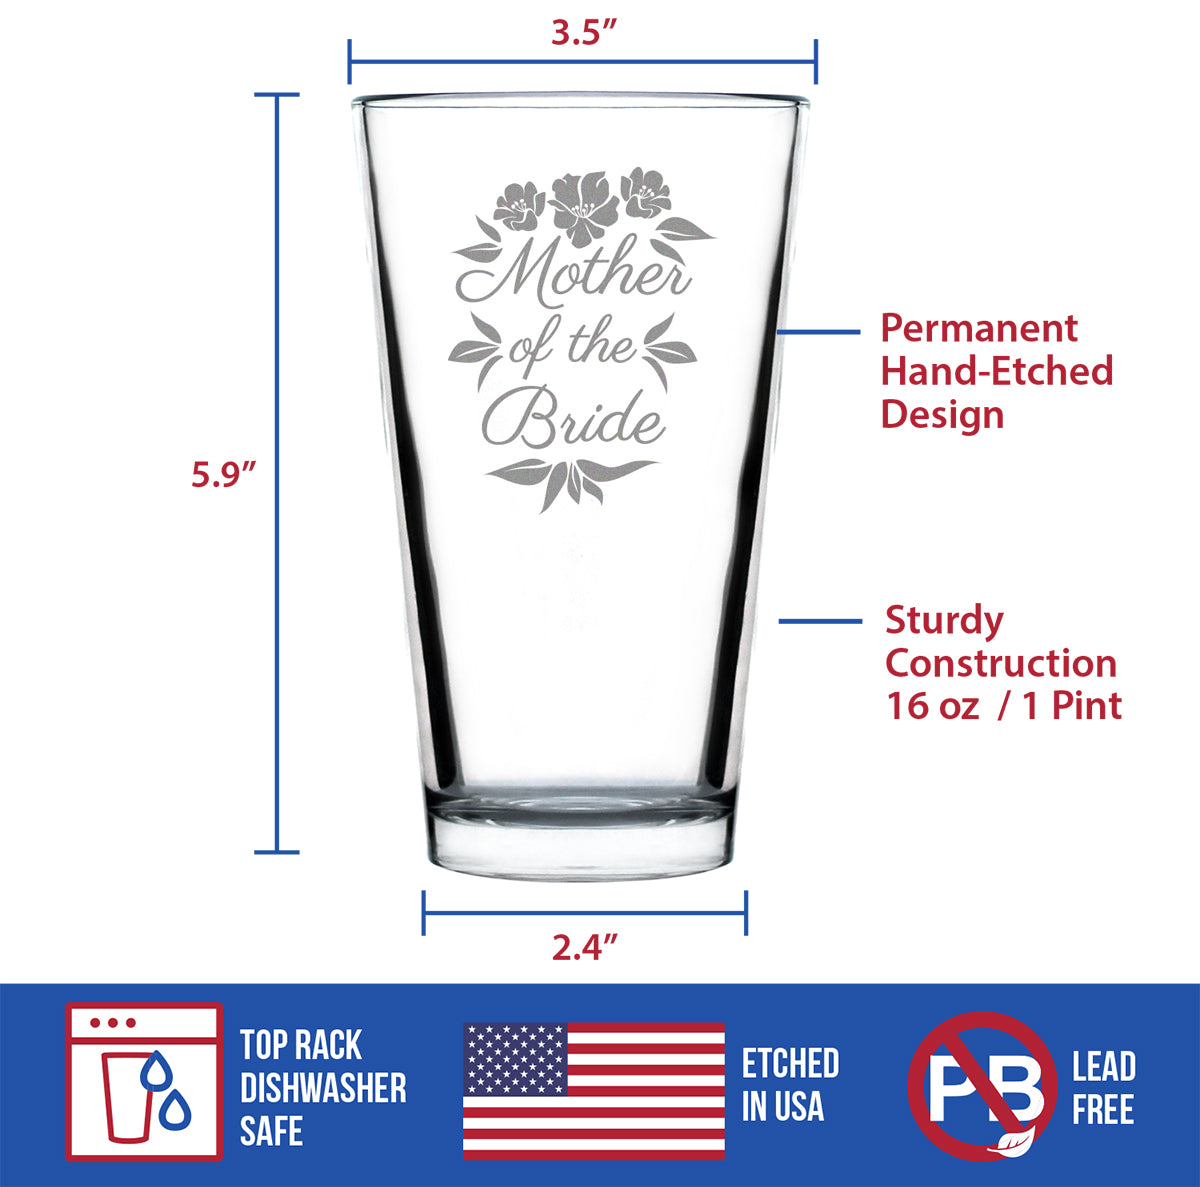 Mother of the Bride Pint Glass - Unique Wedding Gift for Soon to Be Mother-in-Law - Cute Engraved Wedding Cup Gift